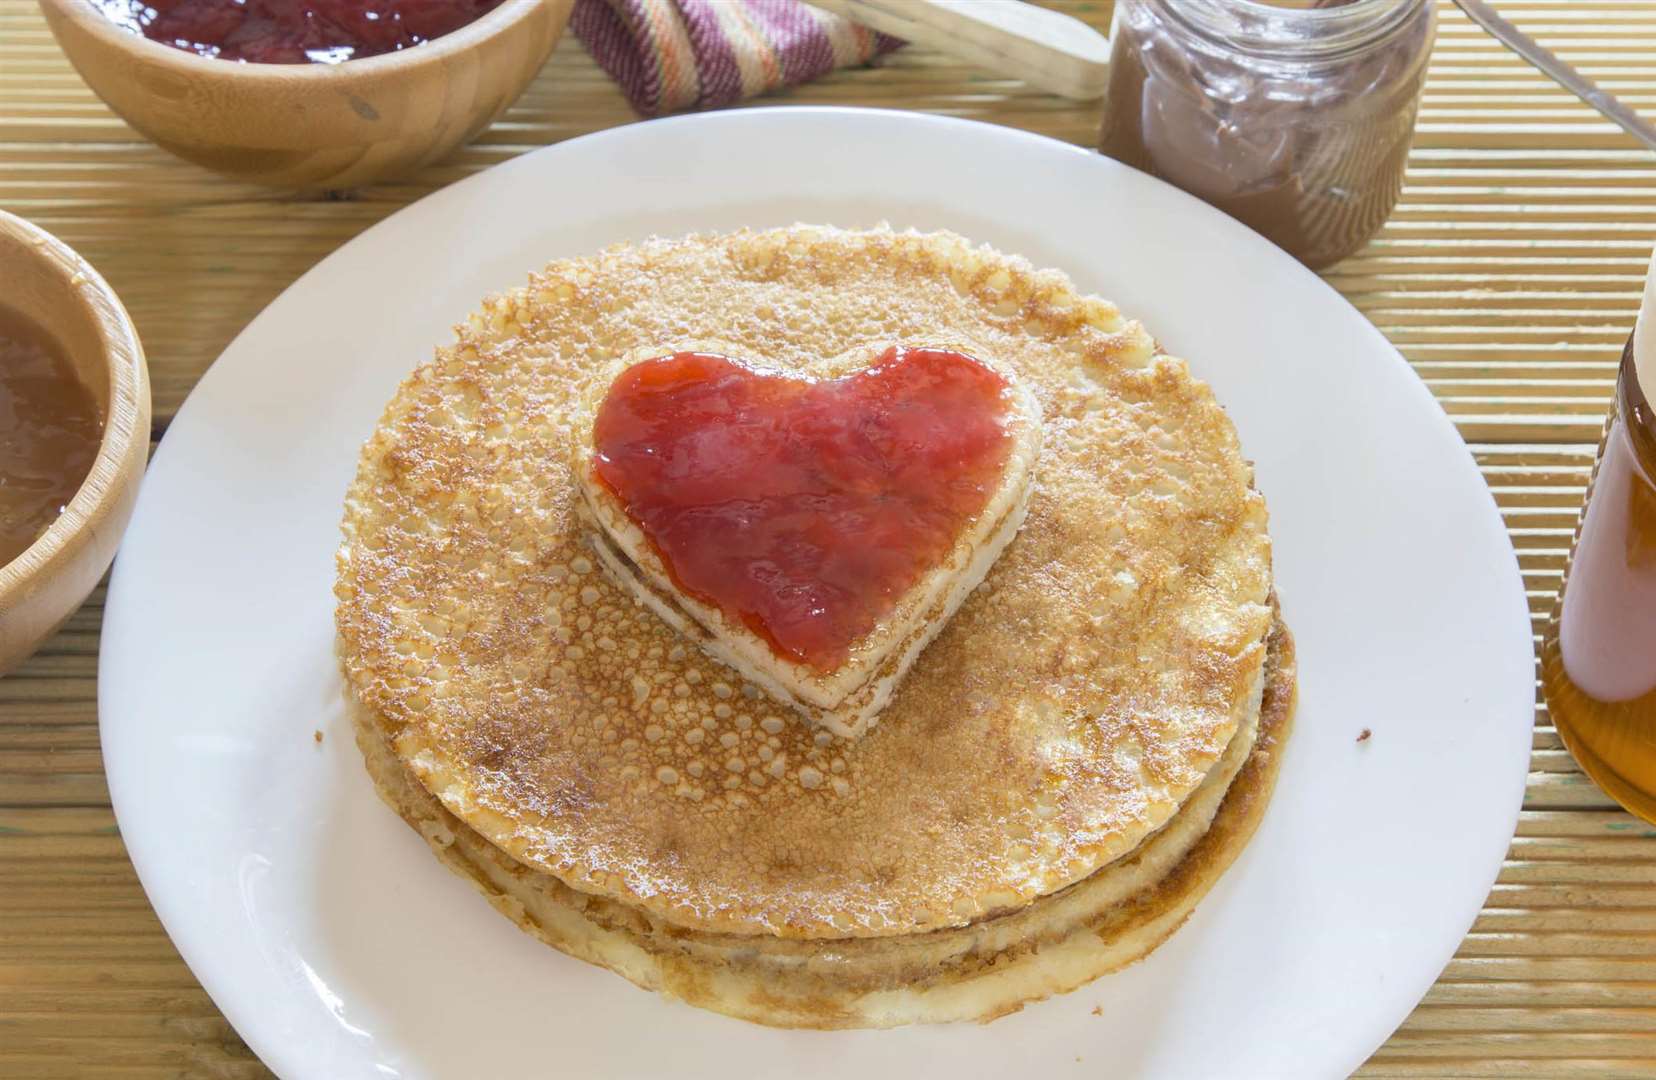 Who loves pancakes?